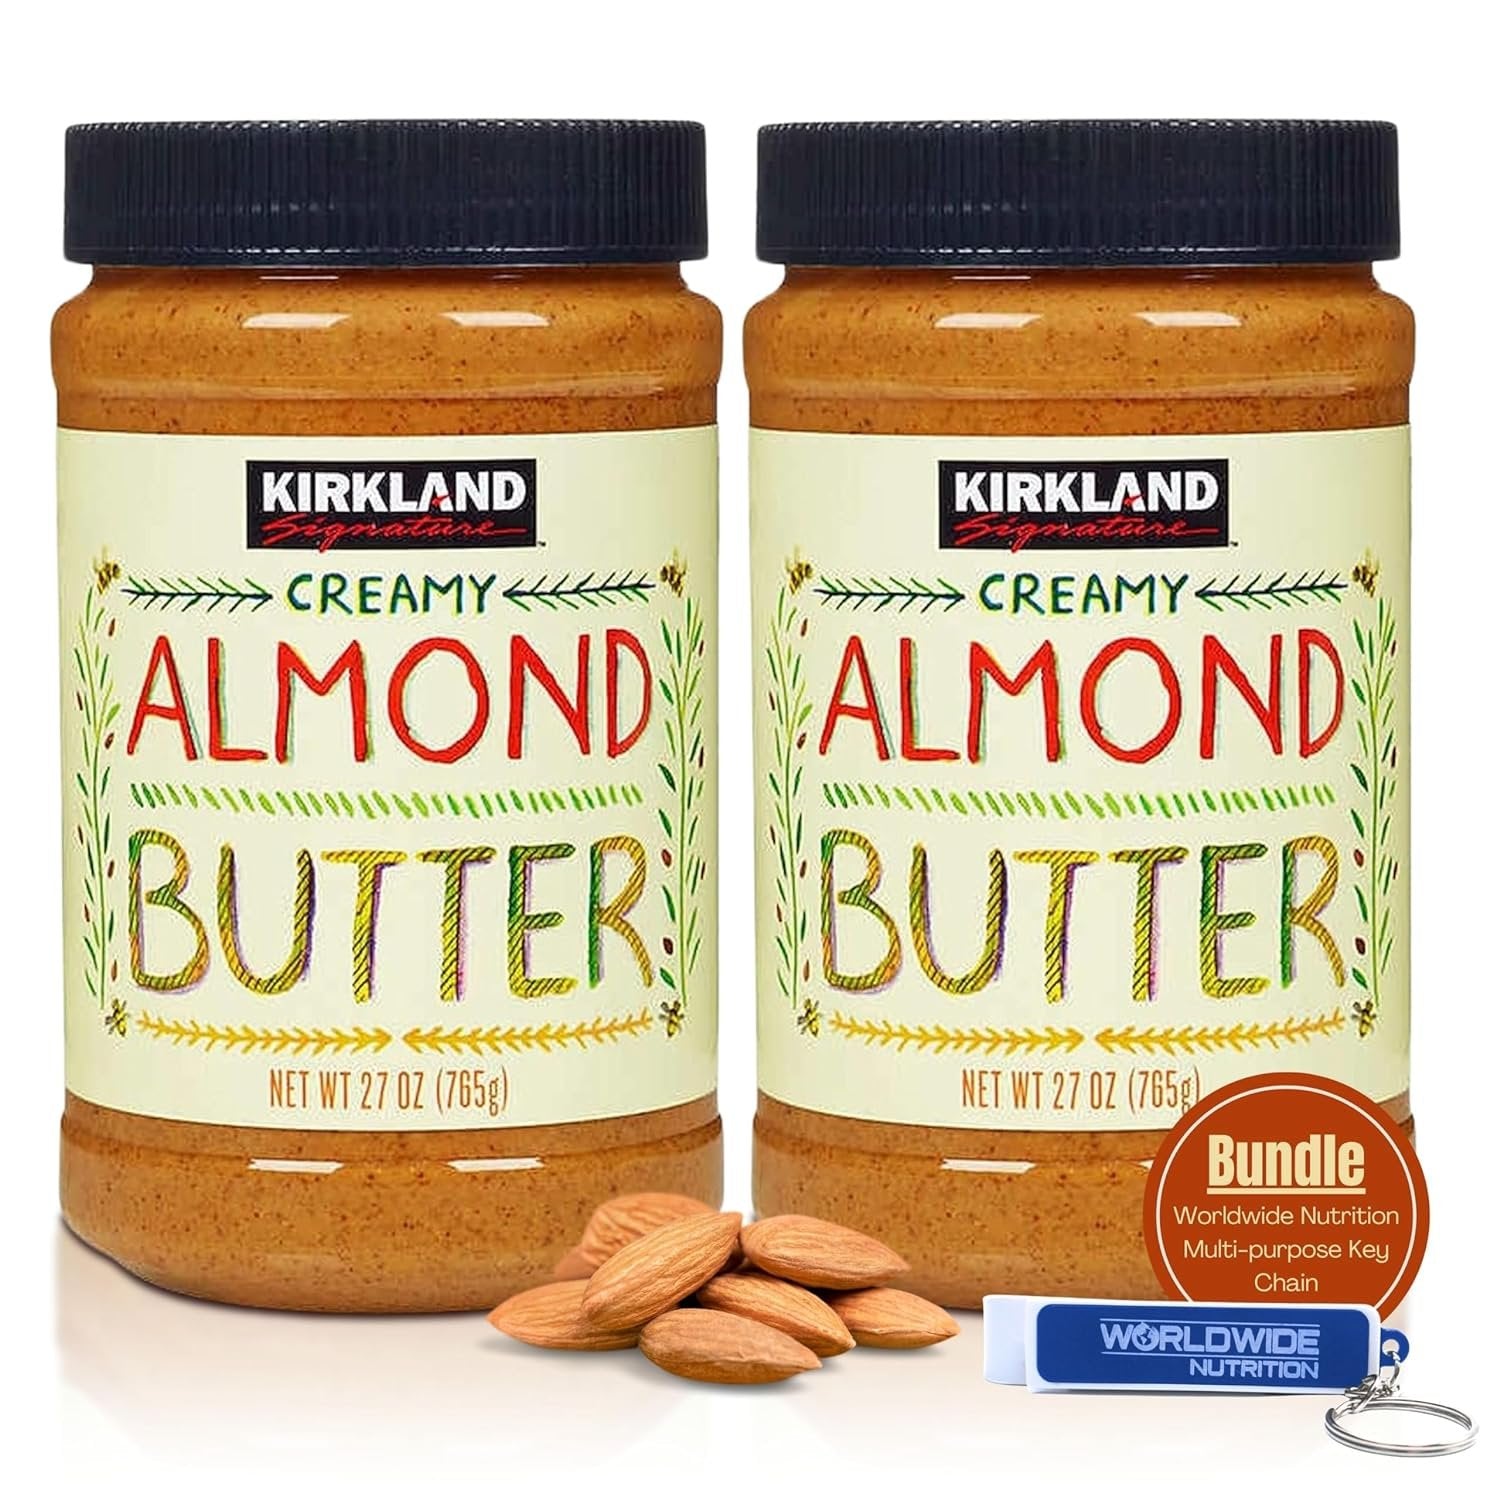 Kirkland Signature Creamy Pure Roasted Almond Butter, 27 oz (765g) - Pack of 2 with Multi-Purpose Keychain